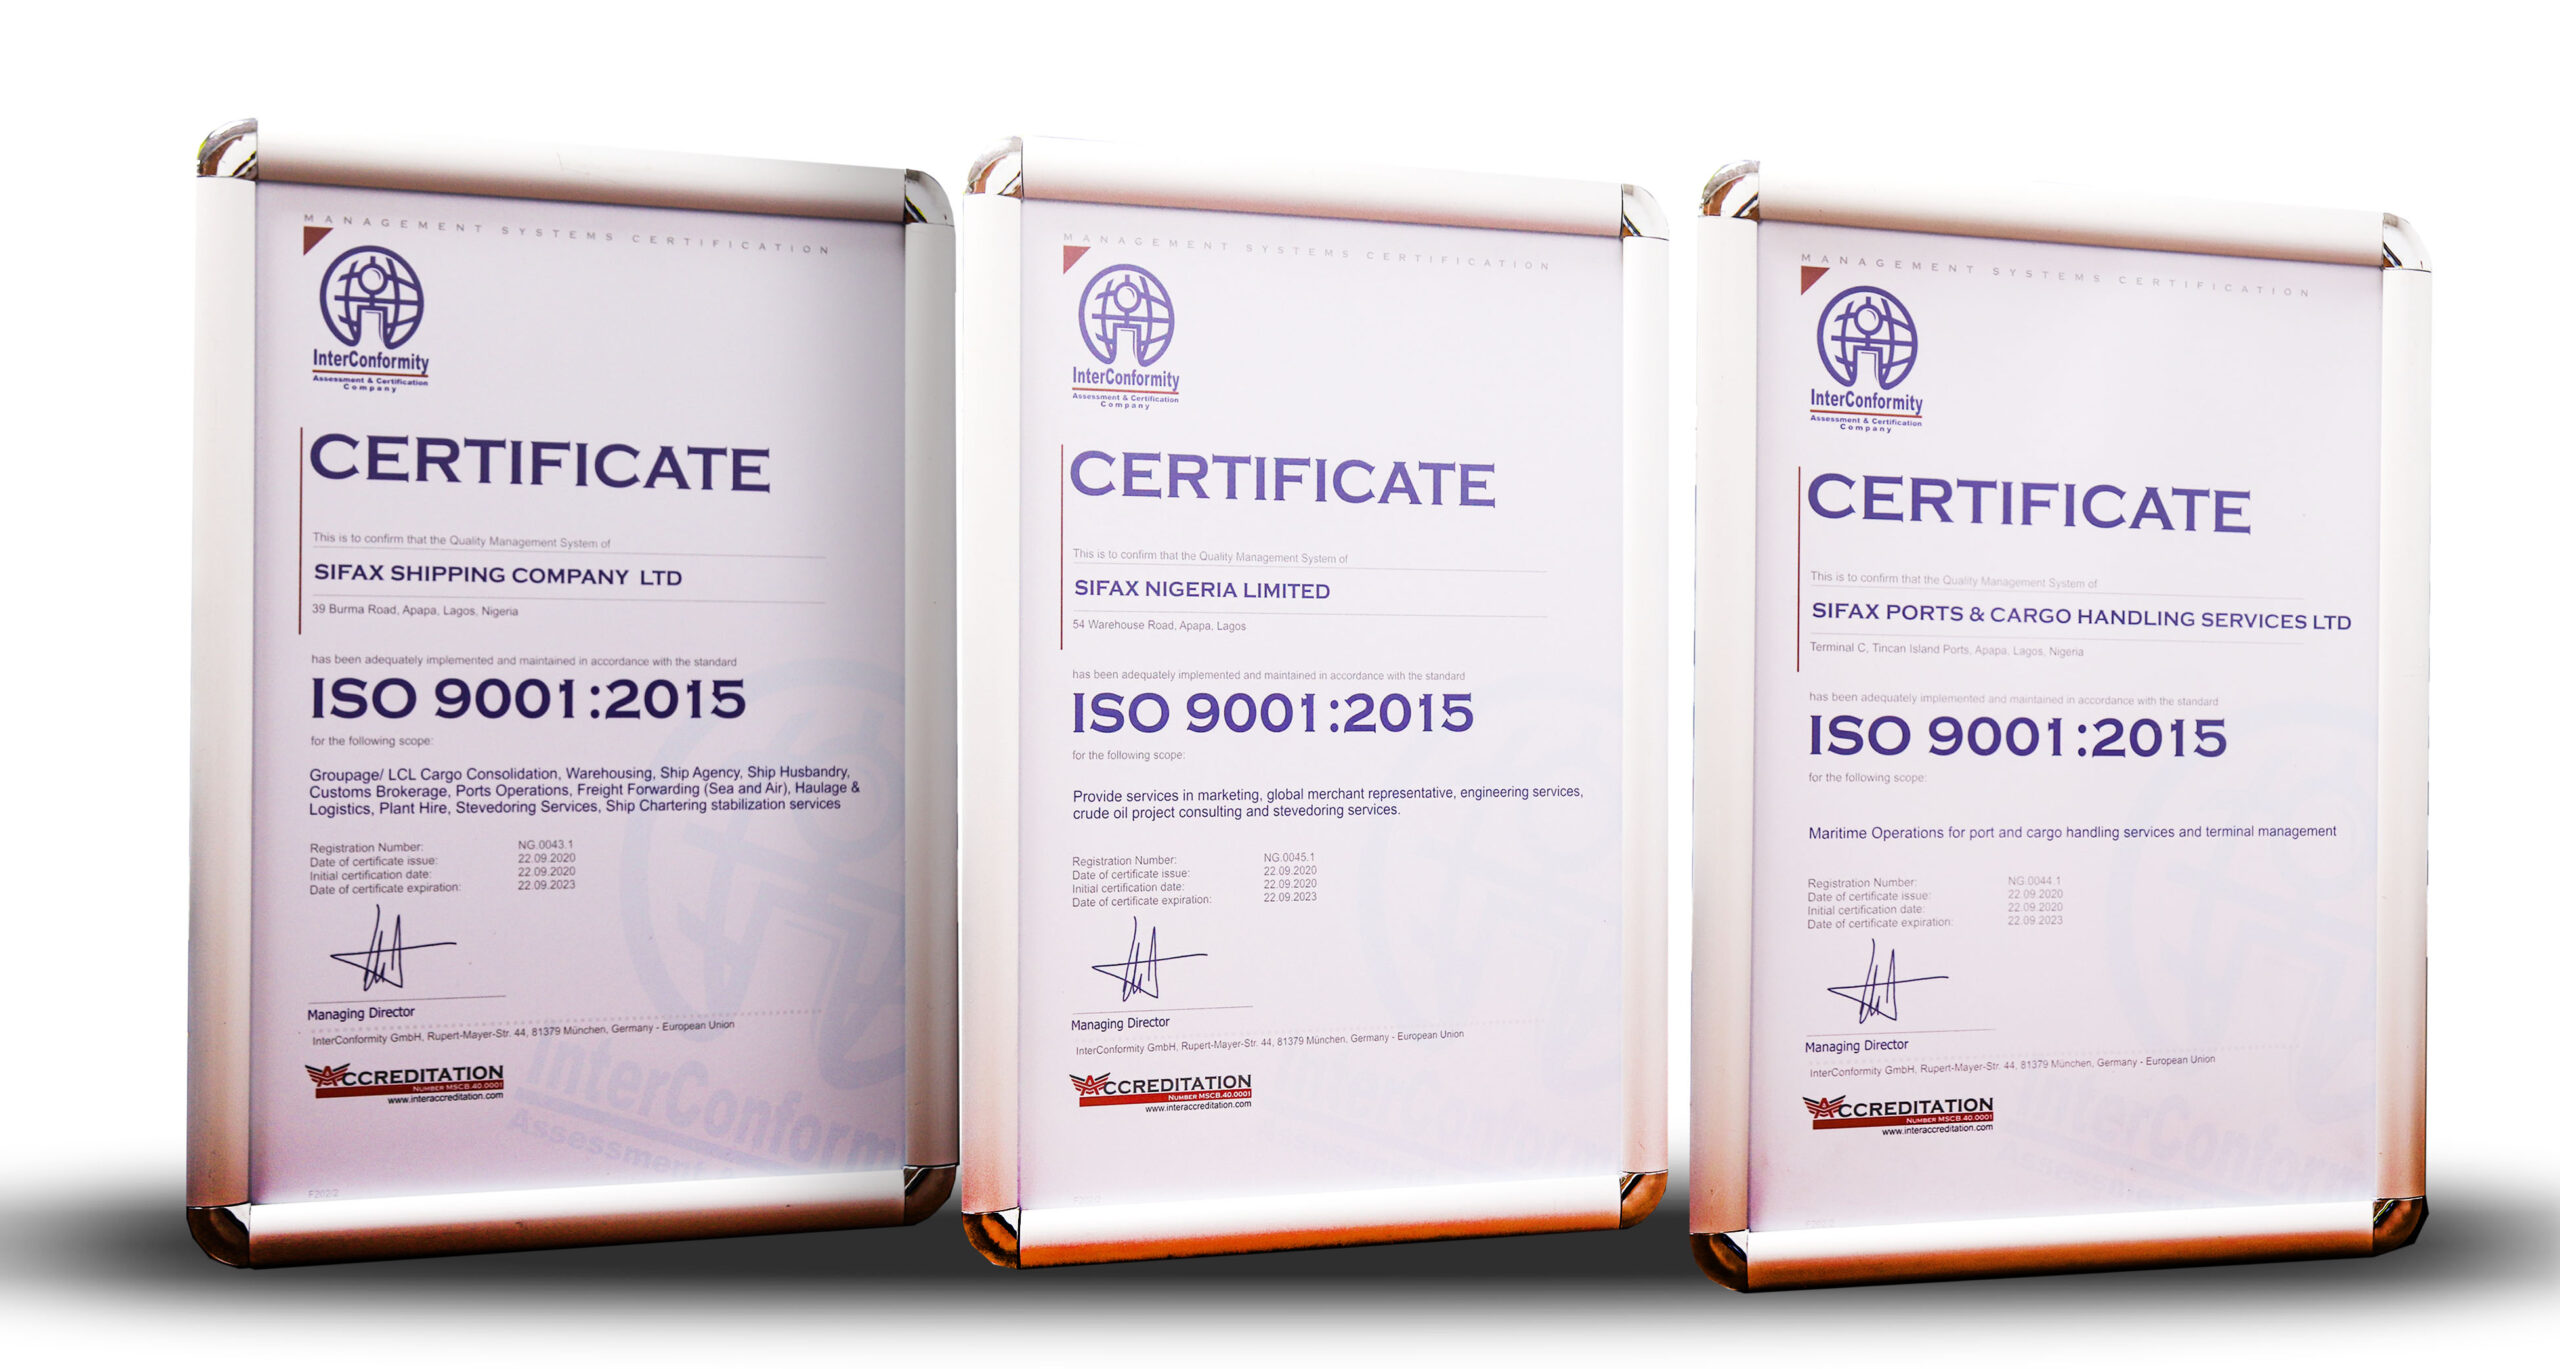 A picture of the three ISO 9001:2015 certificates bagged by the SIFAX Group subsidiaries- Ports & Cargo Handling Services Limited, SIFAX Shipping Company Limited and SIFAX Nigeria Limited.